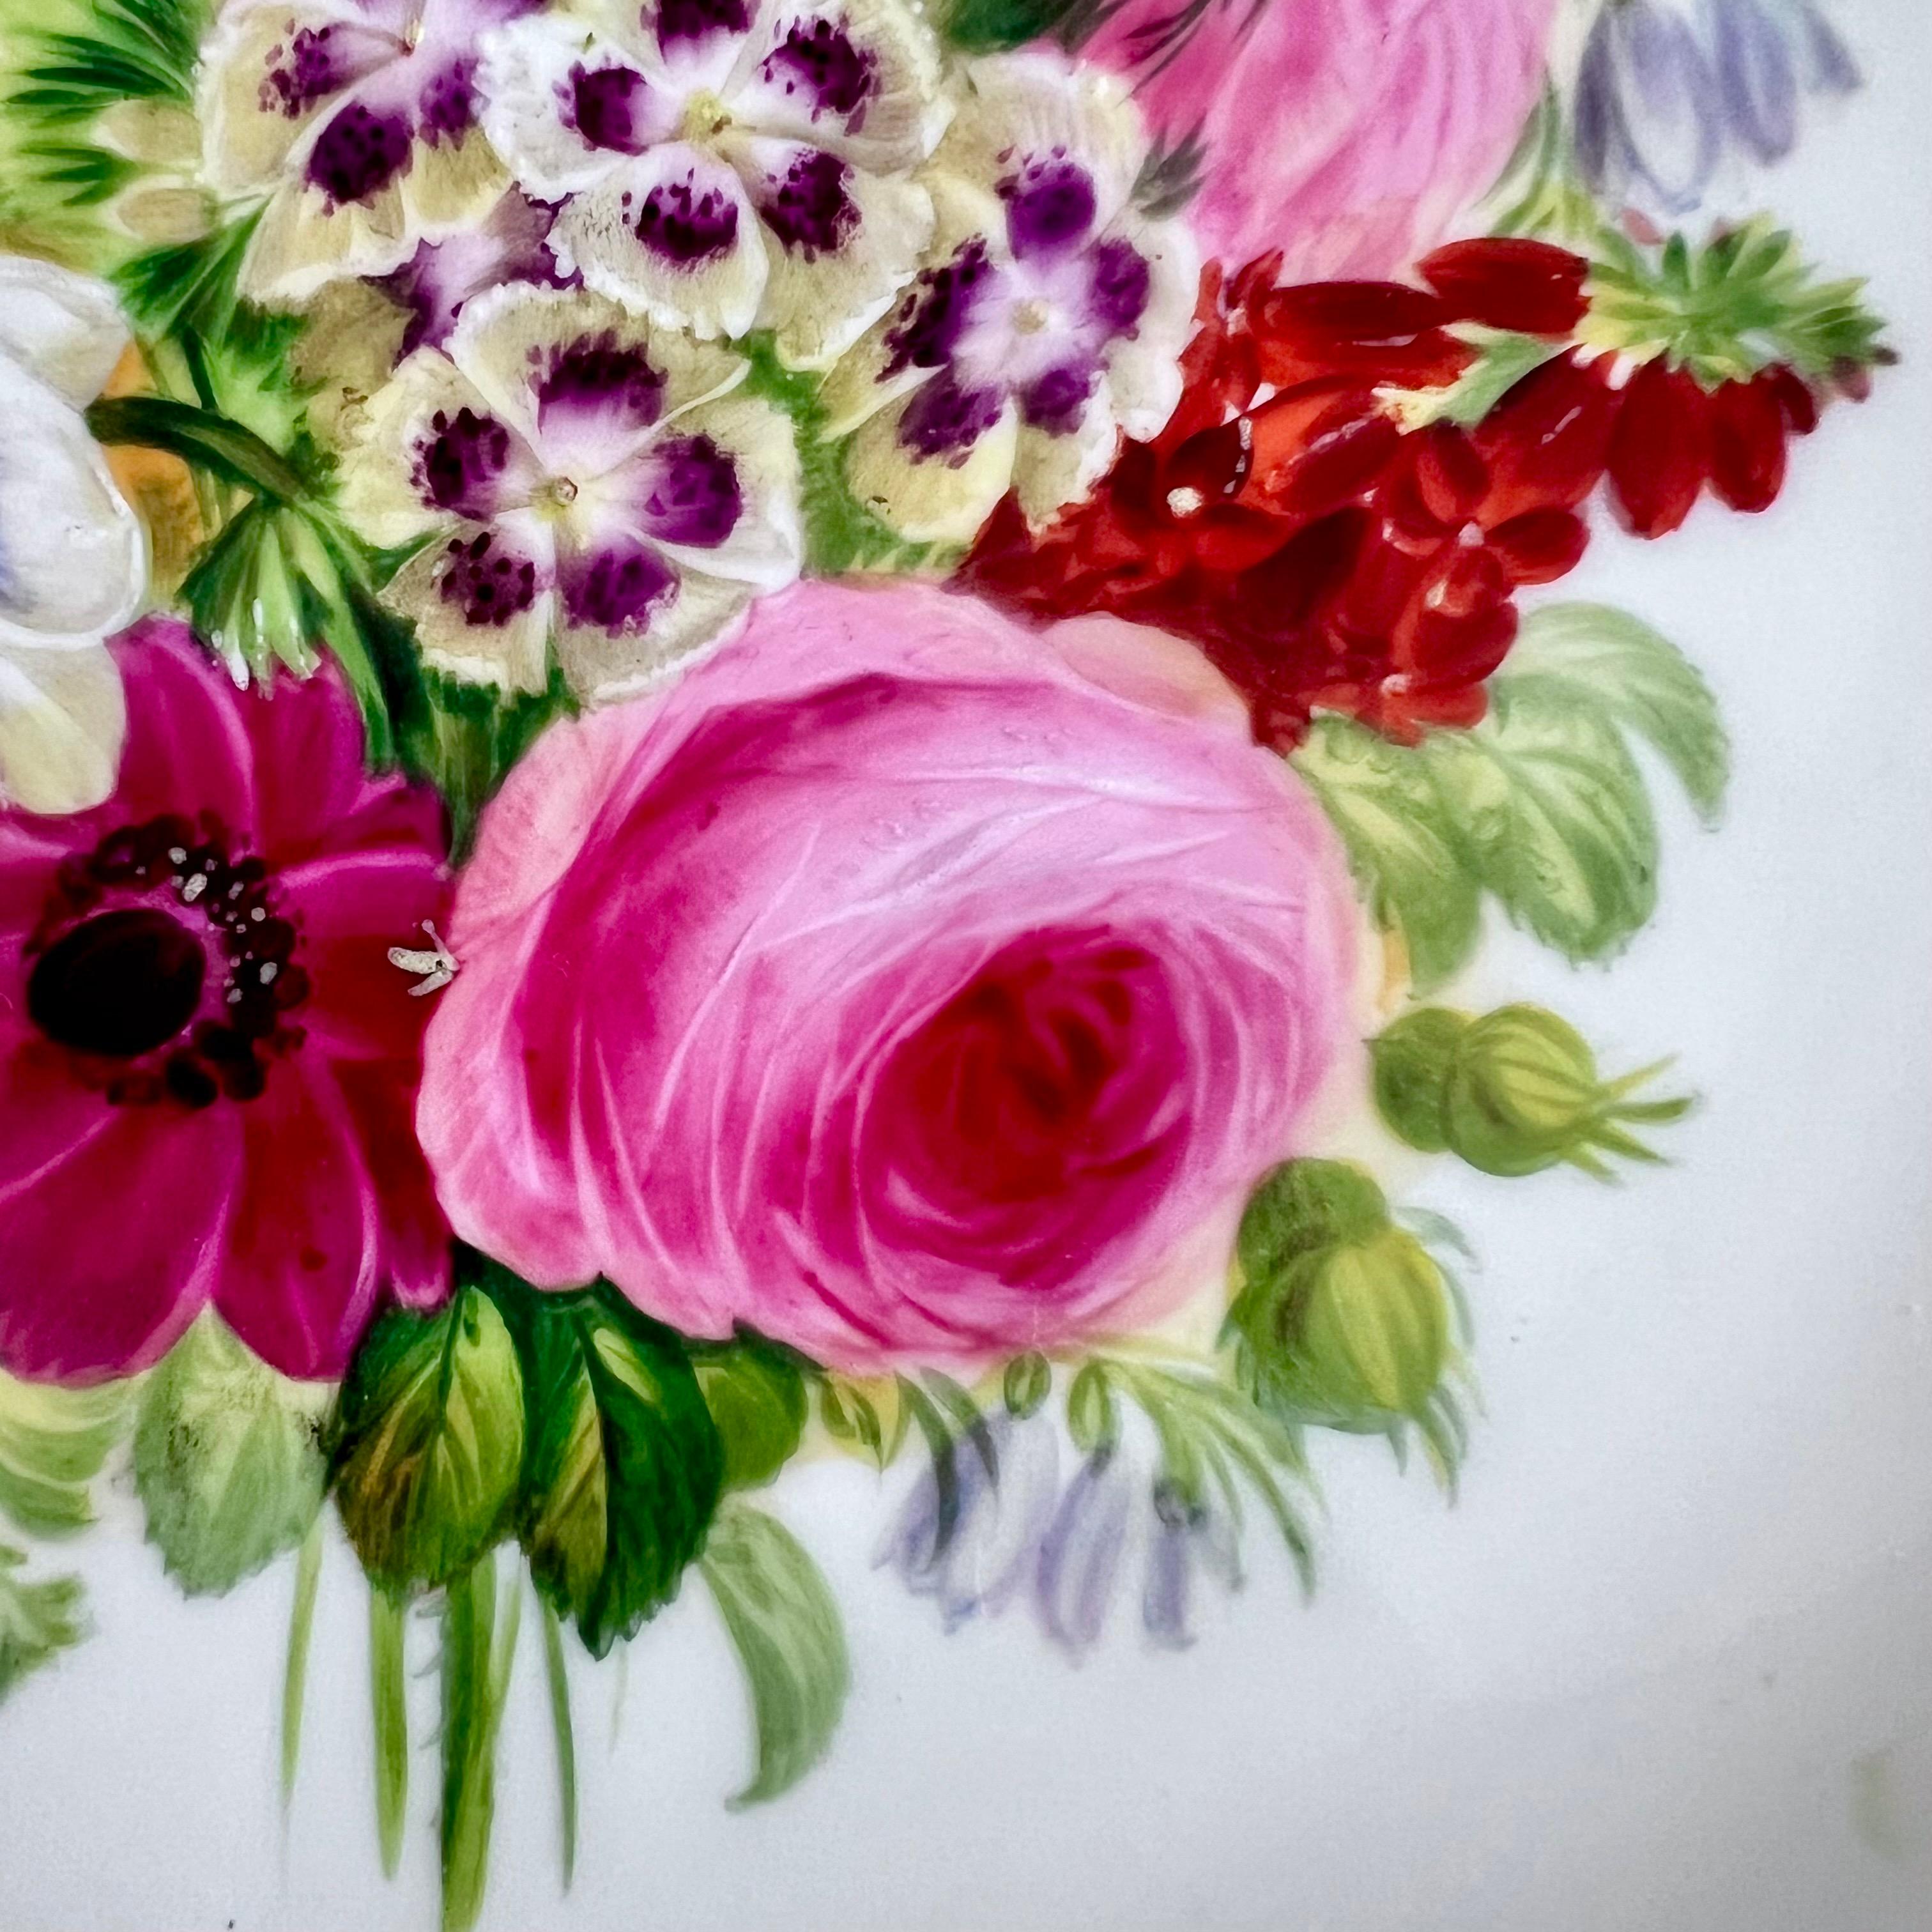 Hand-Painted Copeland Plate, Reticulated, Sublime Flowers by Greatbatch, 1848 (3) For Sale